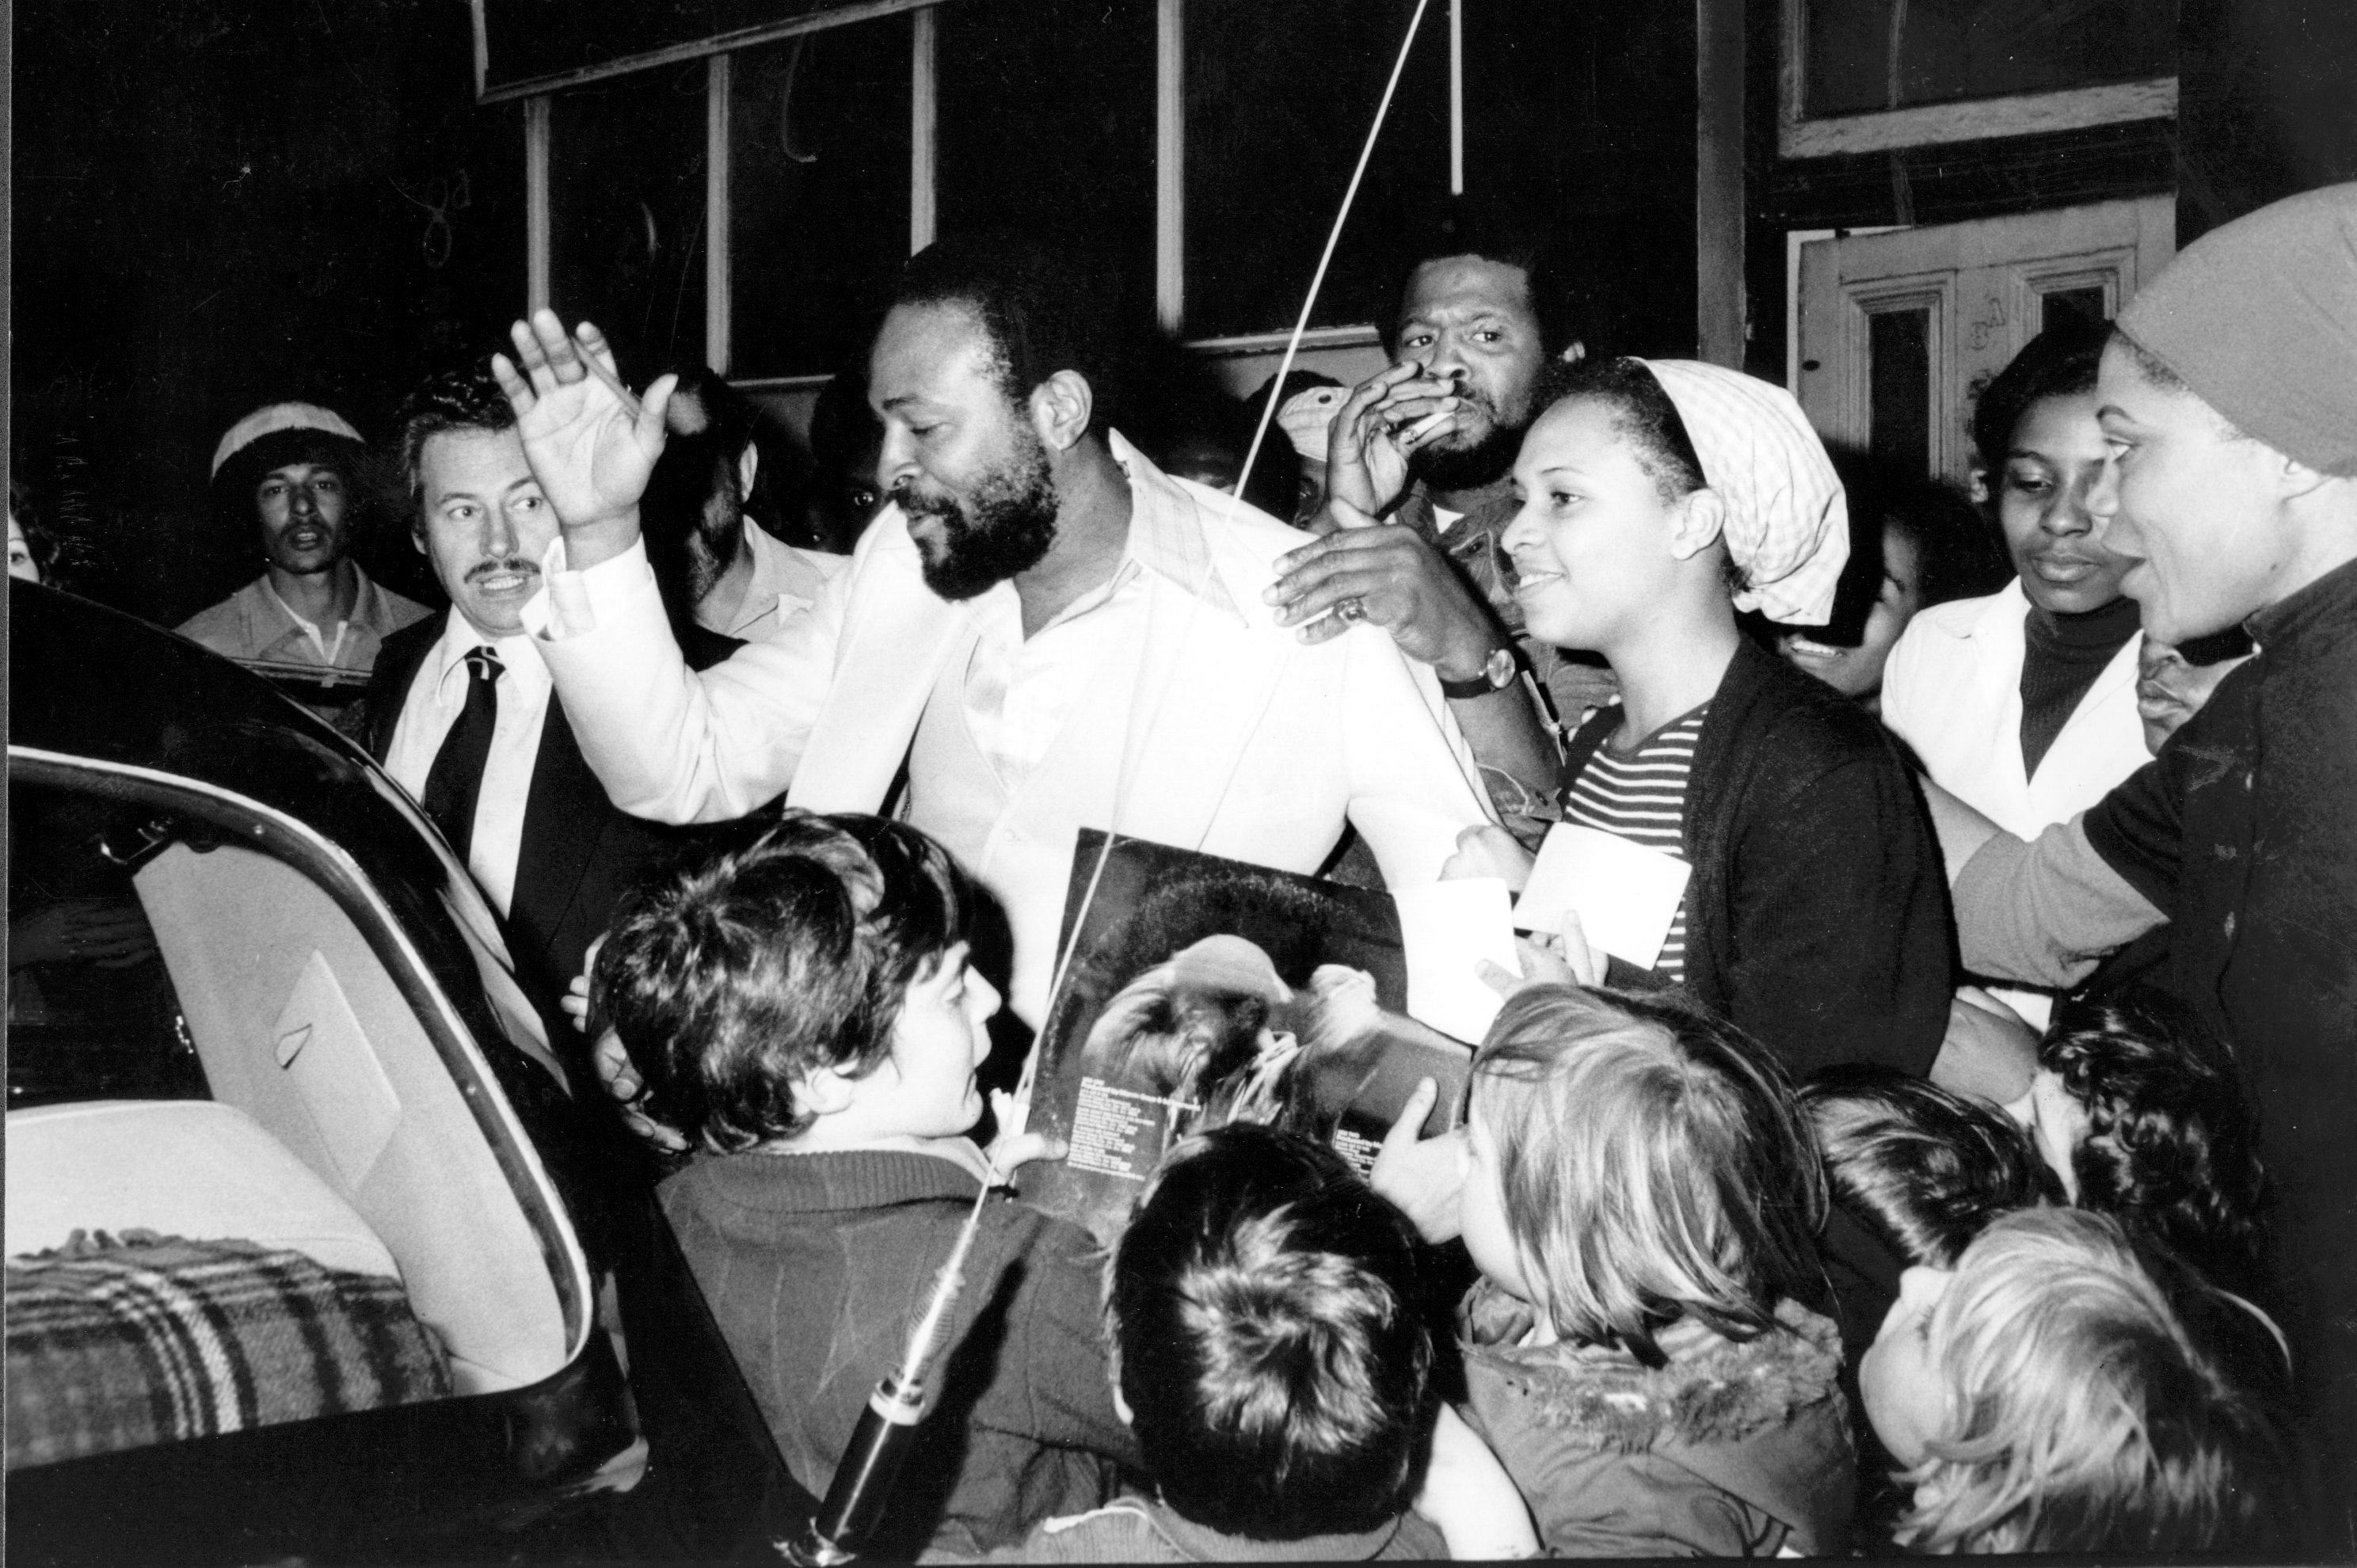 Marvin Gaye gets mobbed by fans while entering a car in London in 1976.